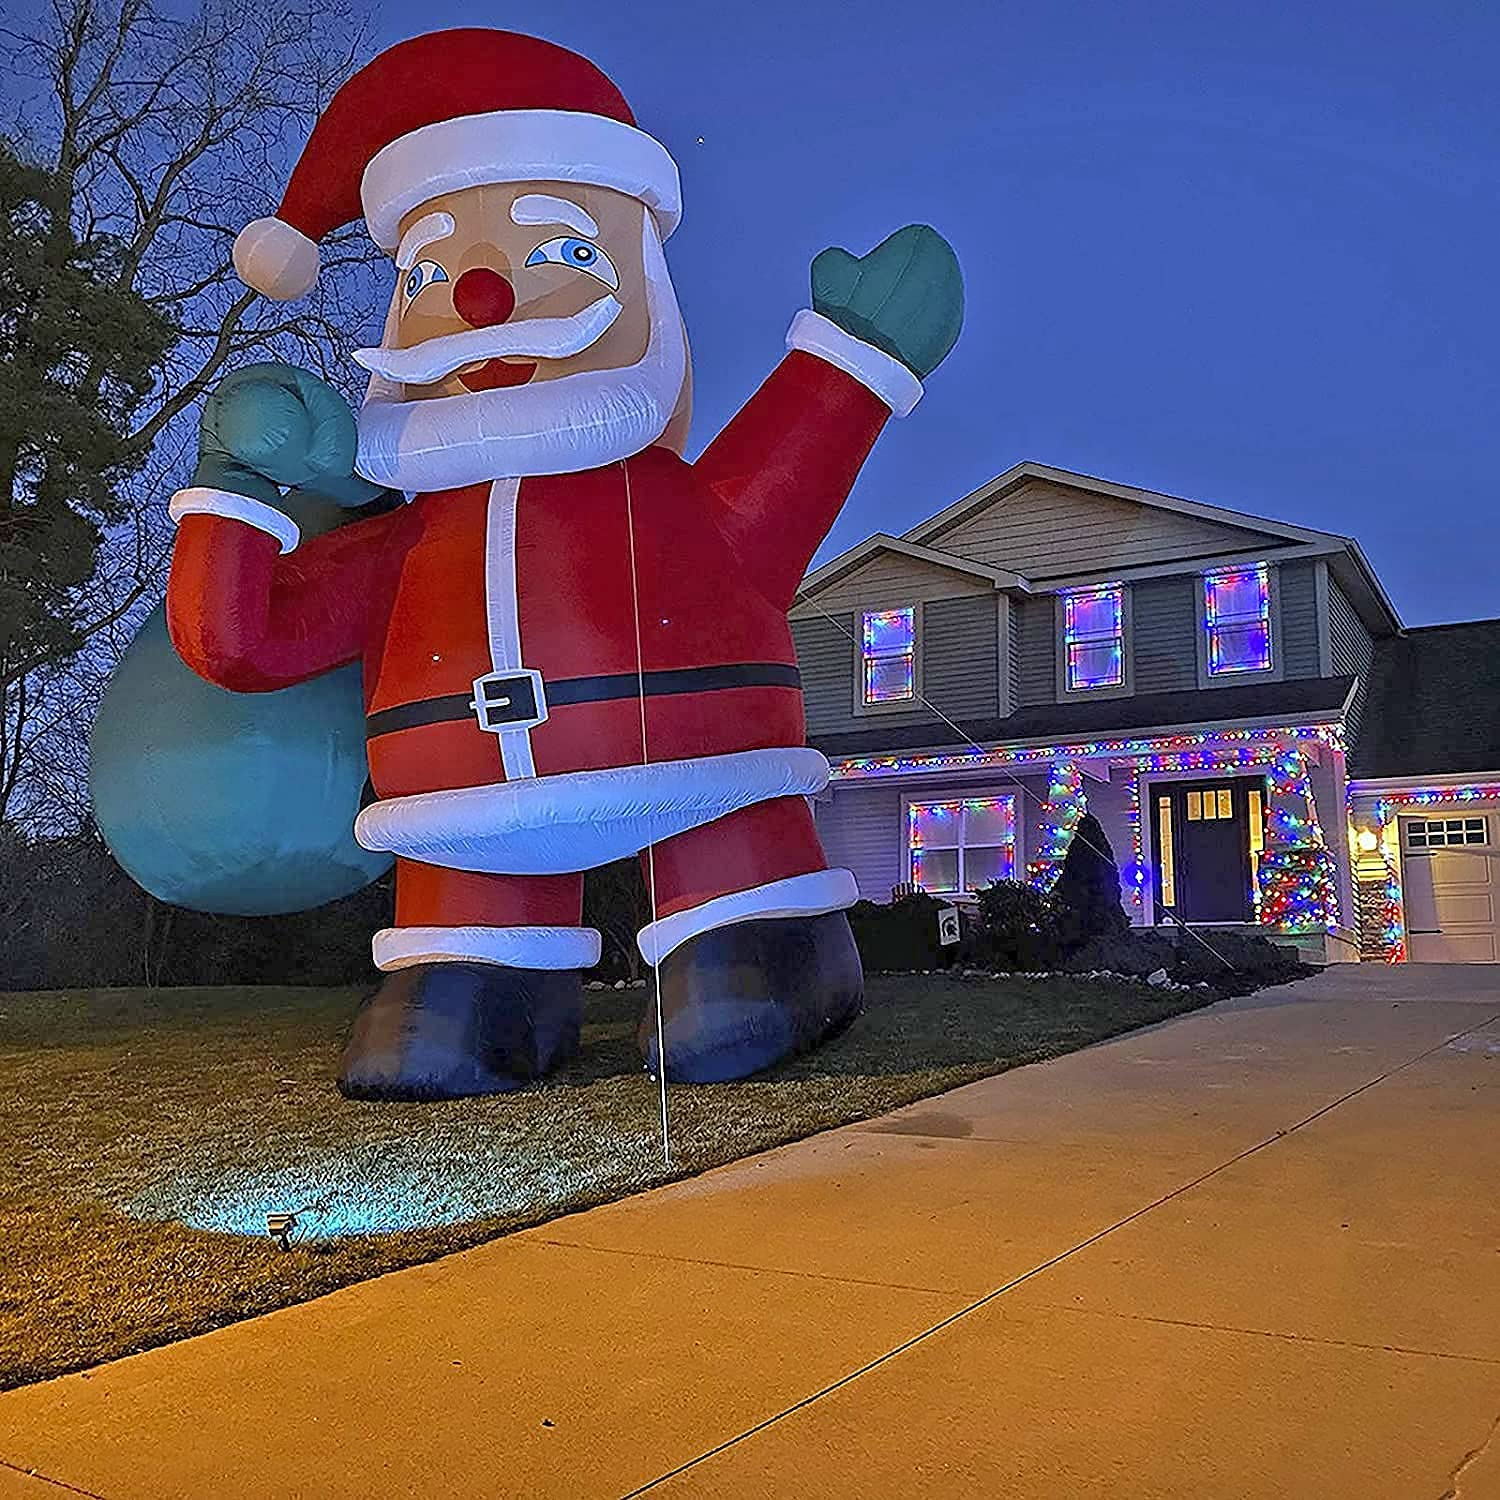 Giant 20Ft Premium Inflatable Santa Claus with Blower for Christmas Yard Decoration Outdoor Yard Lawn Xmas Party Blow Up Decoration with No Light